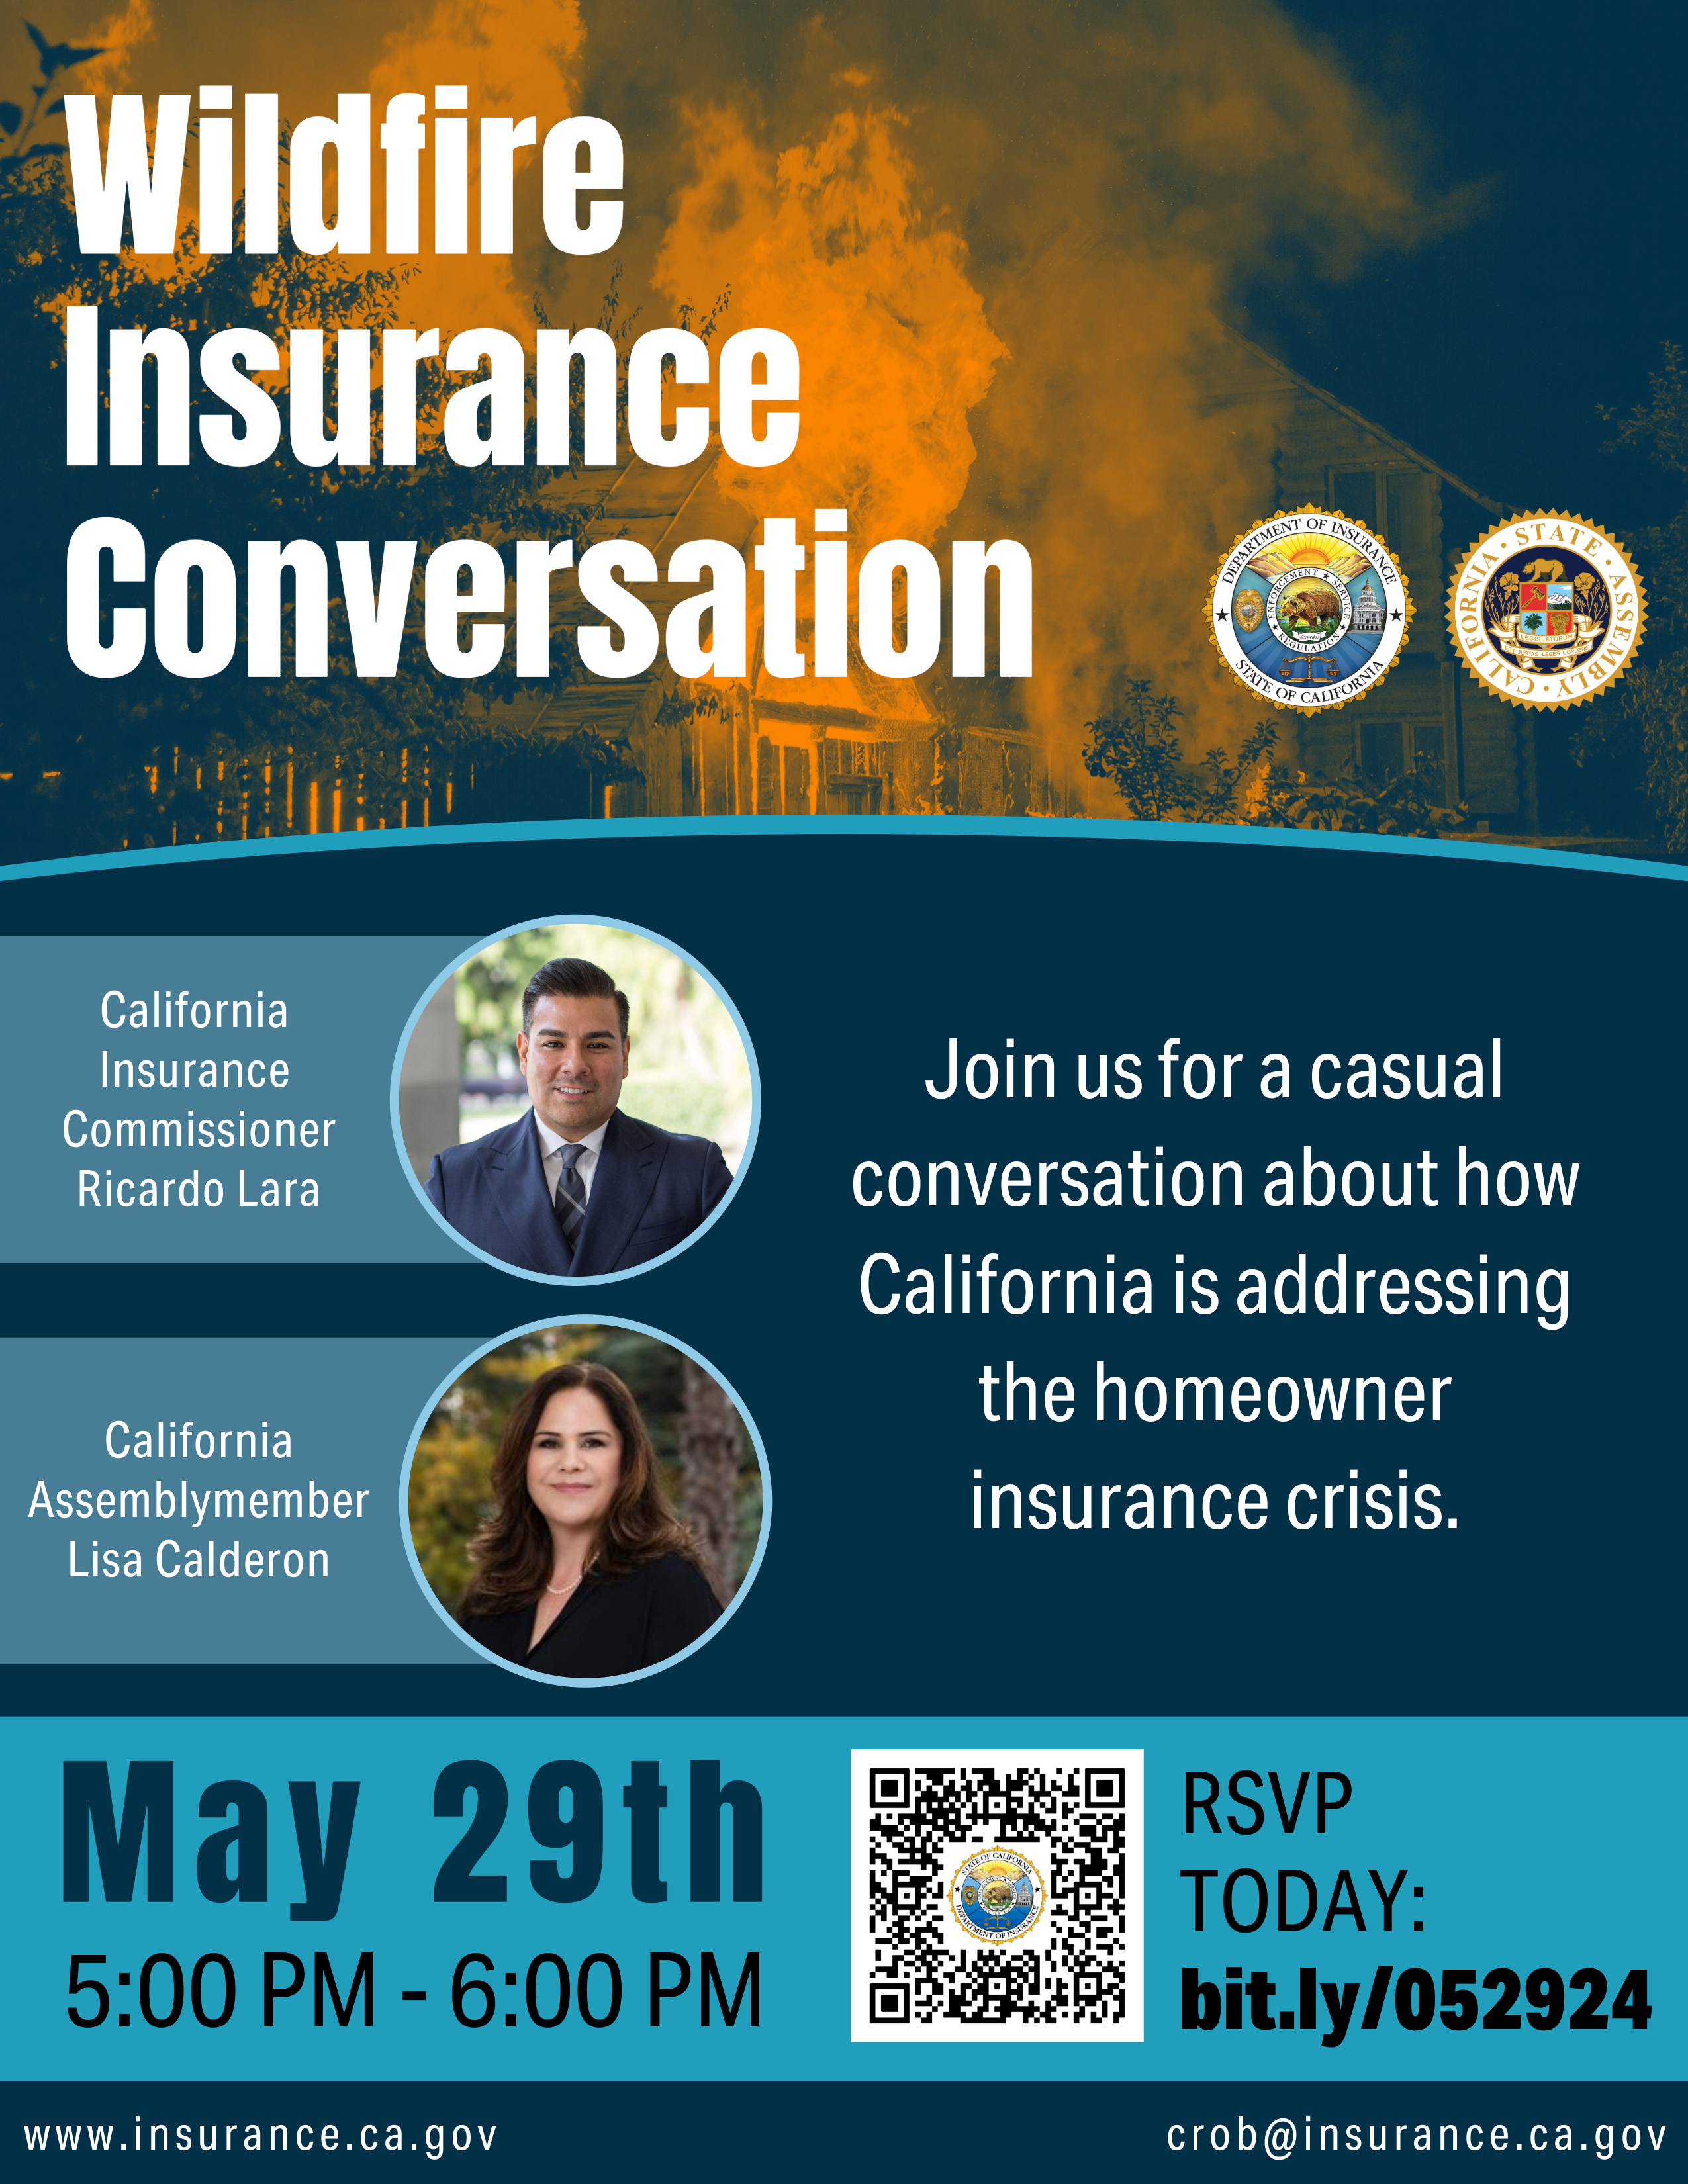 May 29th @ 5PM - Join us for a casual conversation about how California is addressing the homeowner insurance crisis.